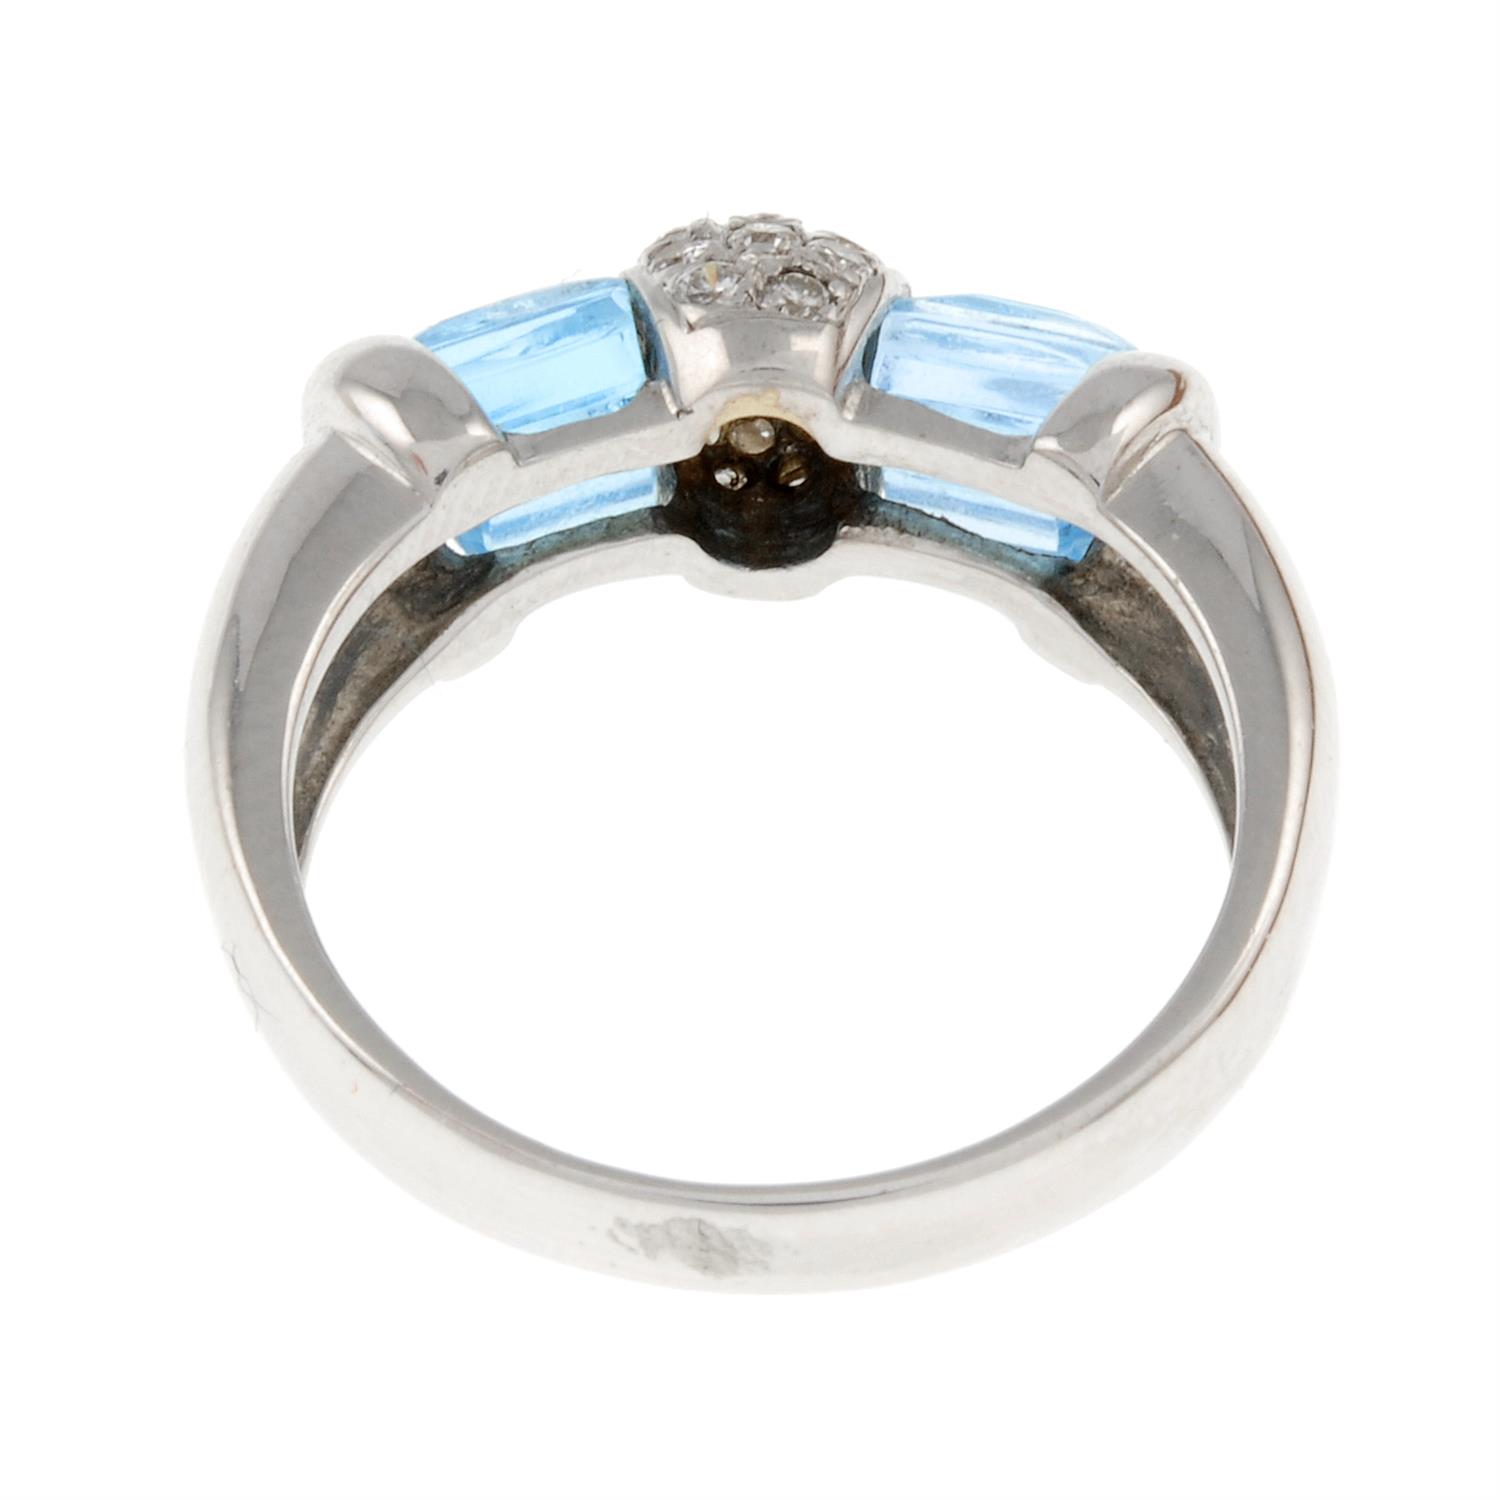 A topaz and pave-set diamond ring. - Image 4 of 4